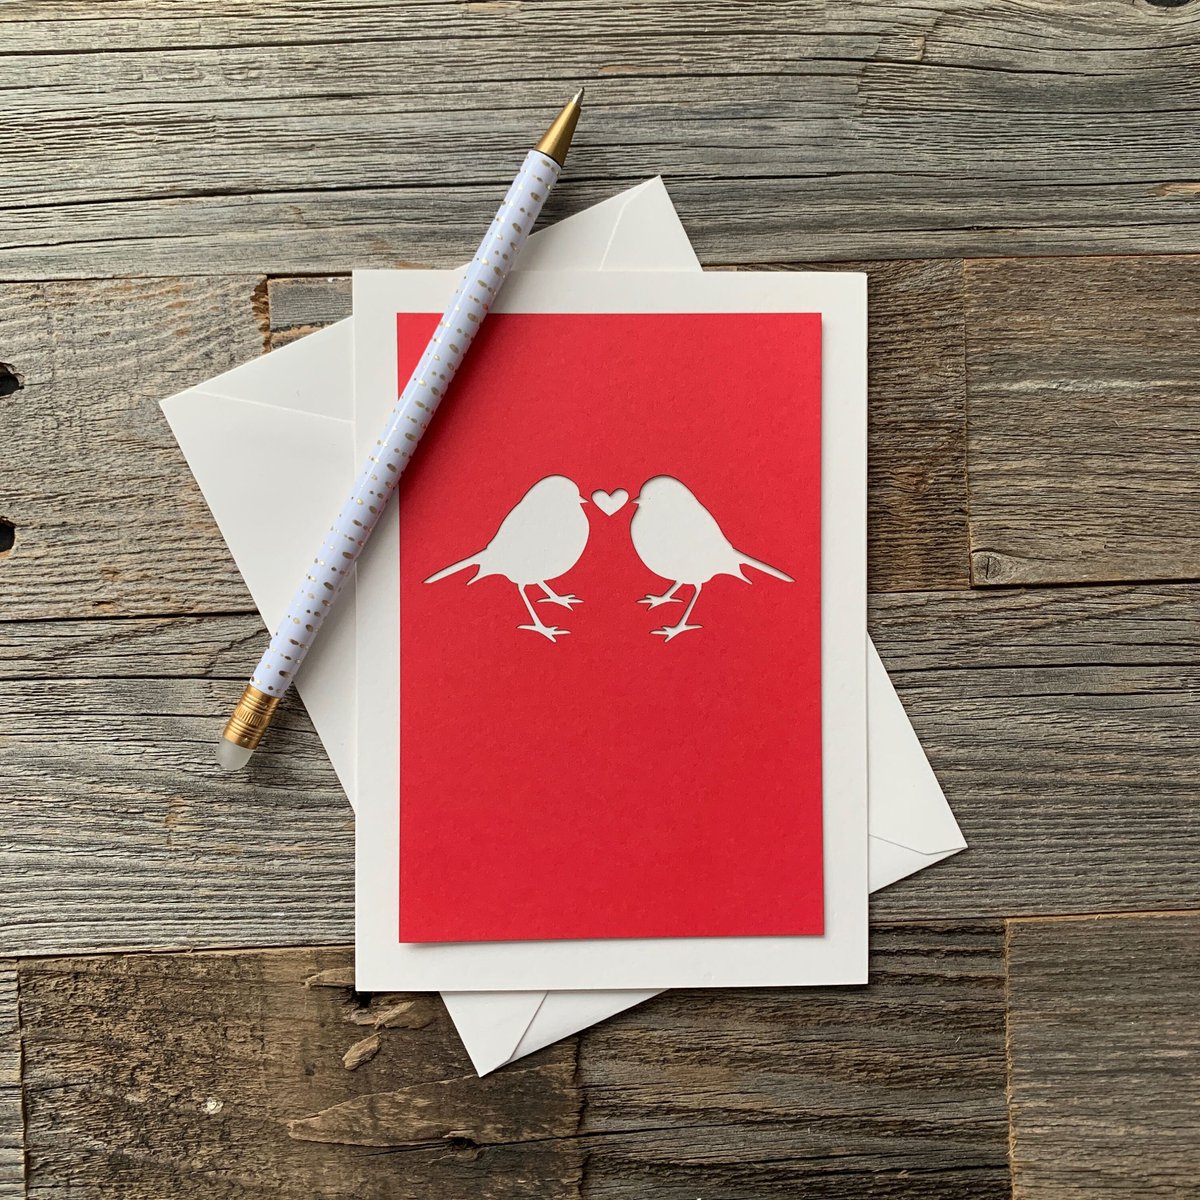 Thanks for the great review Johanna B. ★★★★★! etsy.me/3JwYfWv #etsy #anniversary #white #red #lovecard #blanklovecard #lovecardforman #funnylovecard #anniversarycard #cardforboyfriend